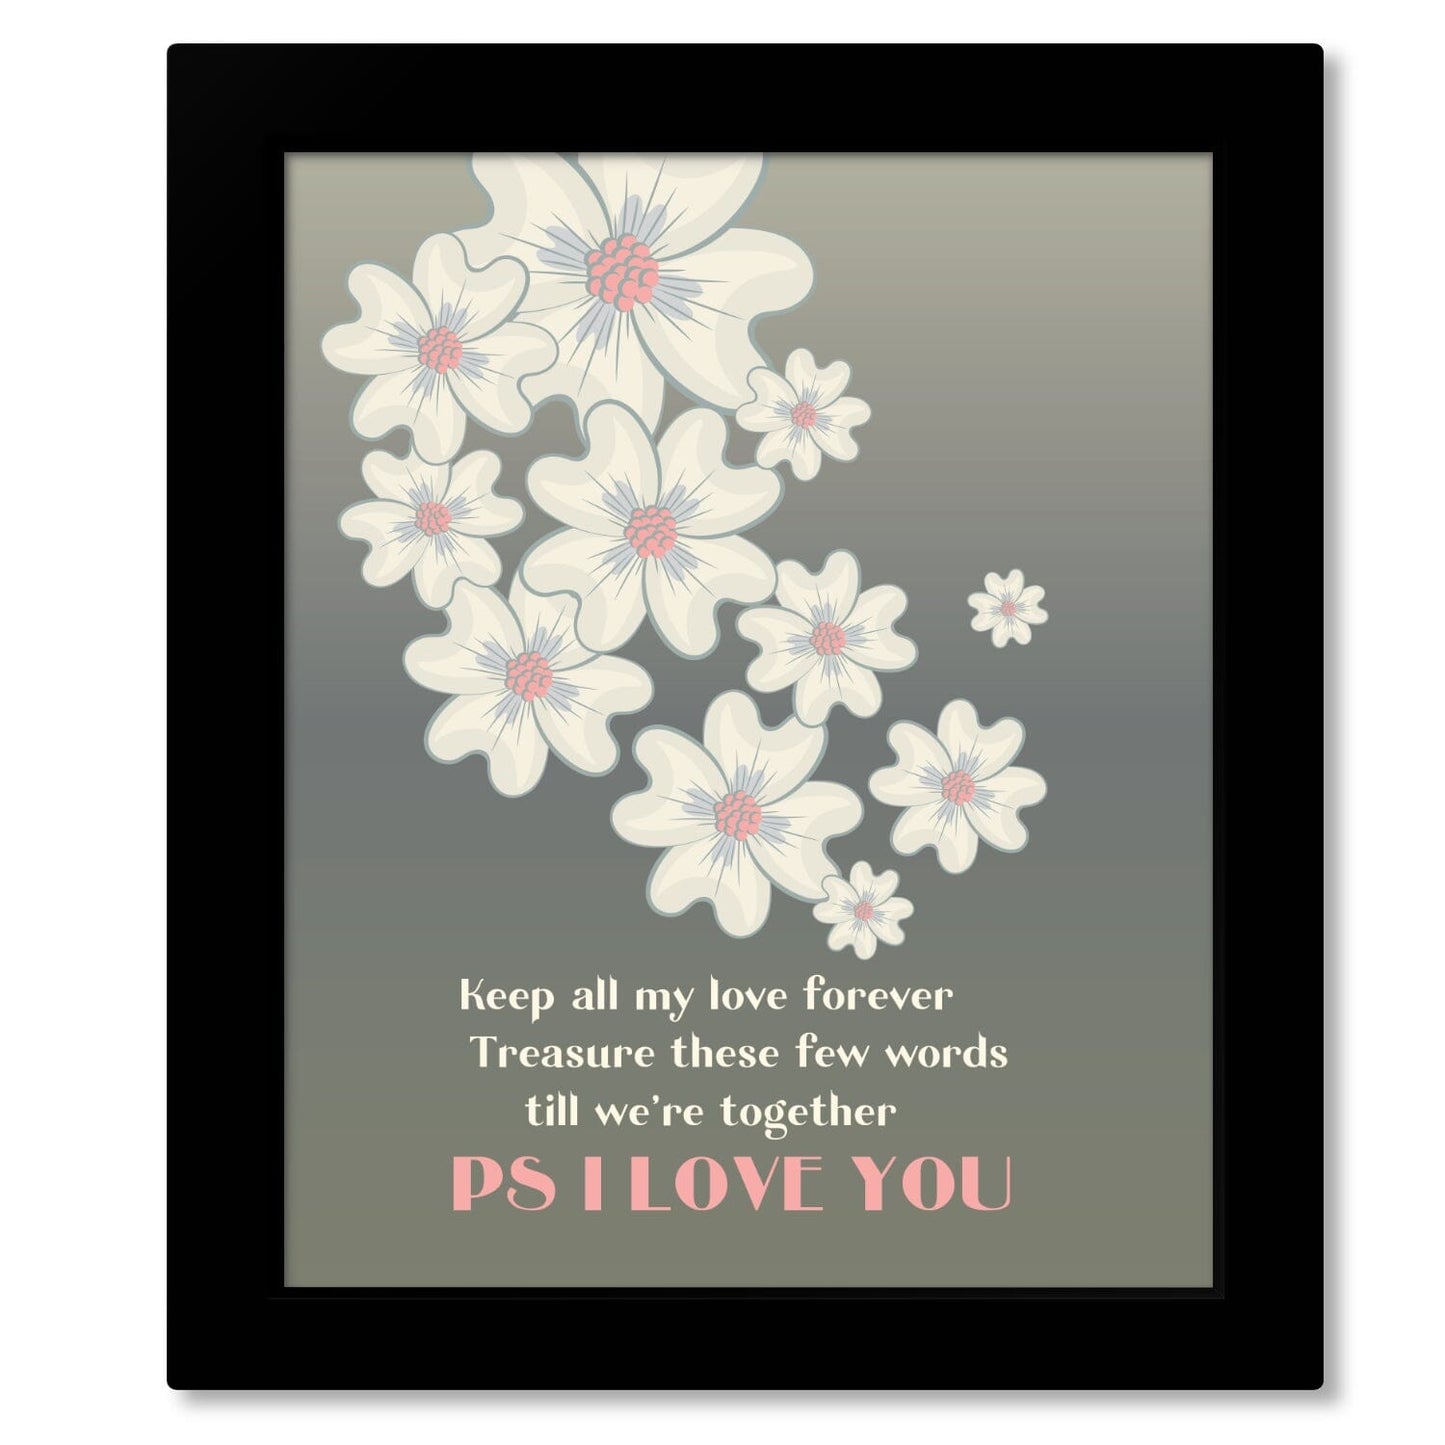 PS I Love You by Beatles - Music Memorabilia Love Song Art Song Lyrics Art Song Lyrics Art 8x10 Framed Print (without mat) 